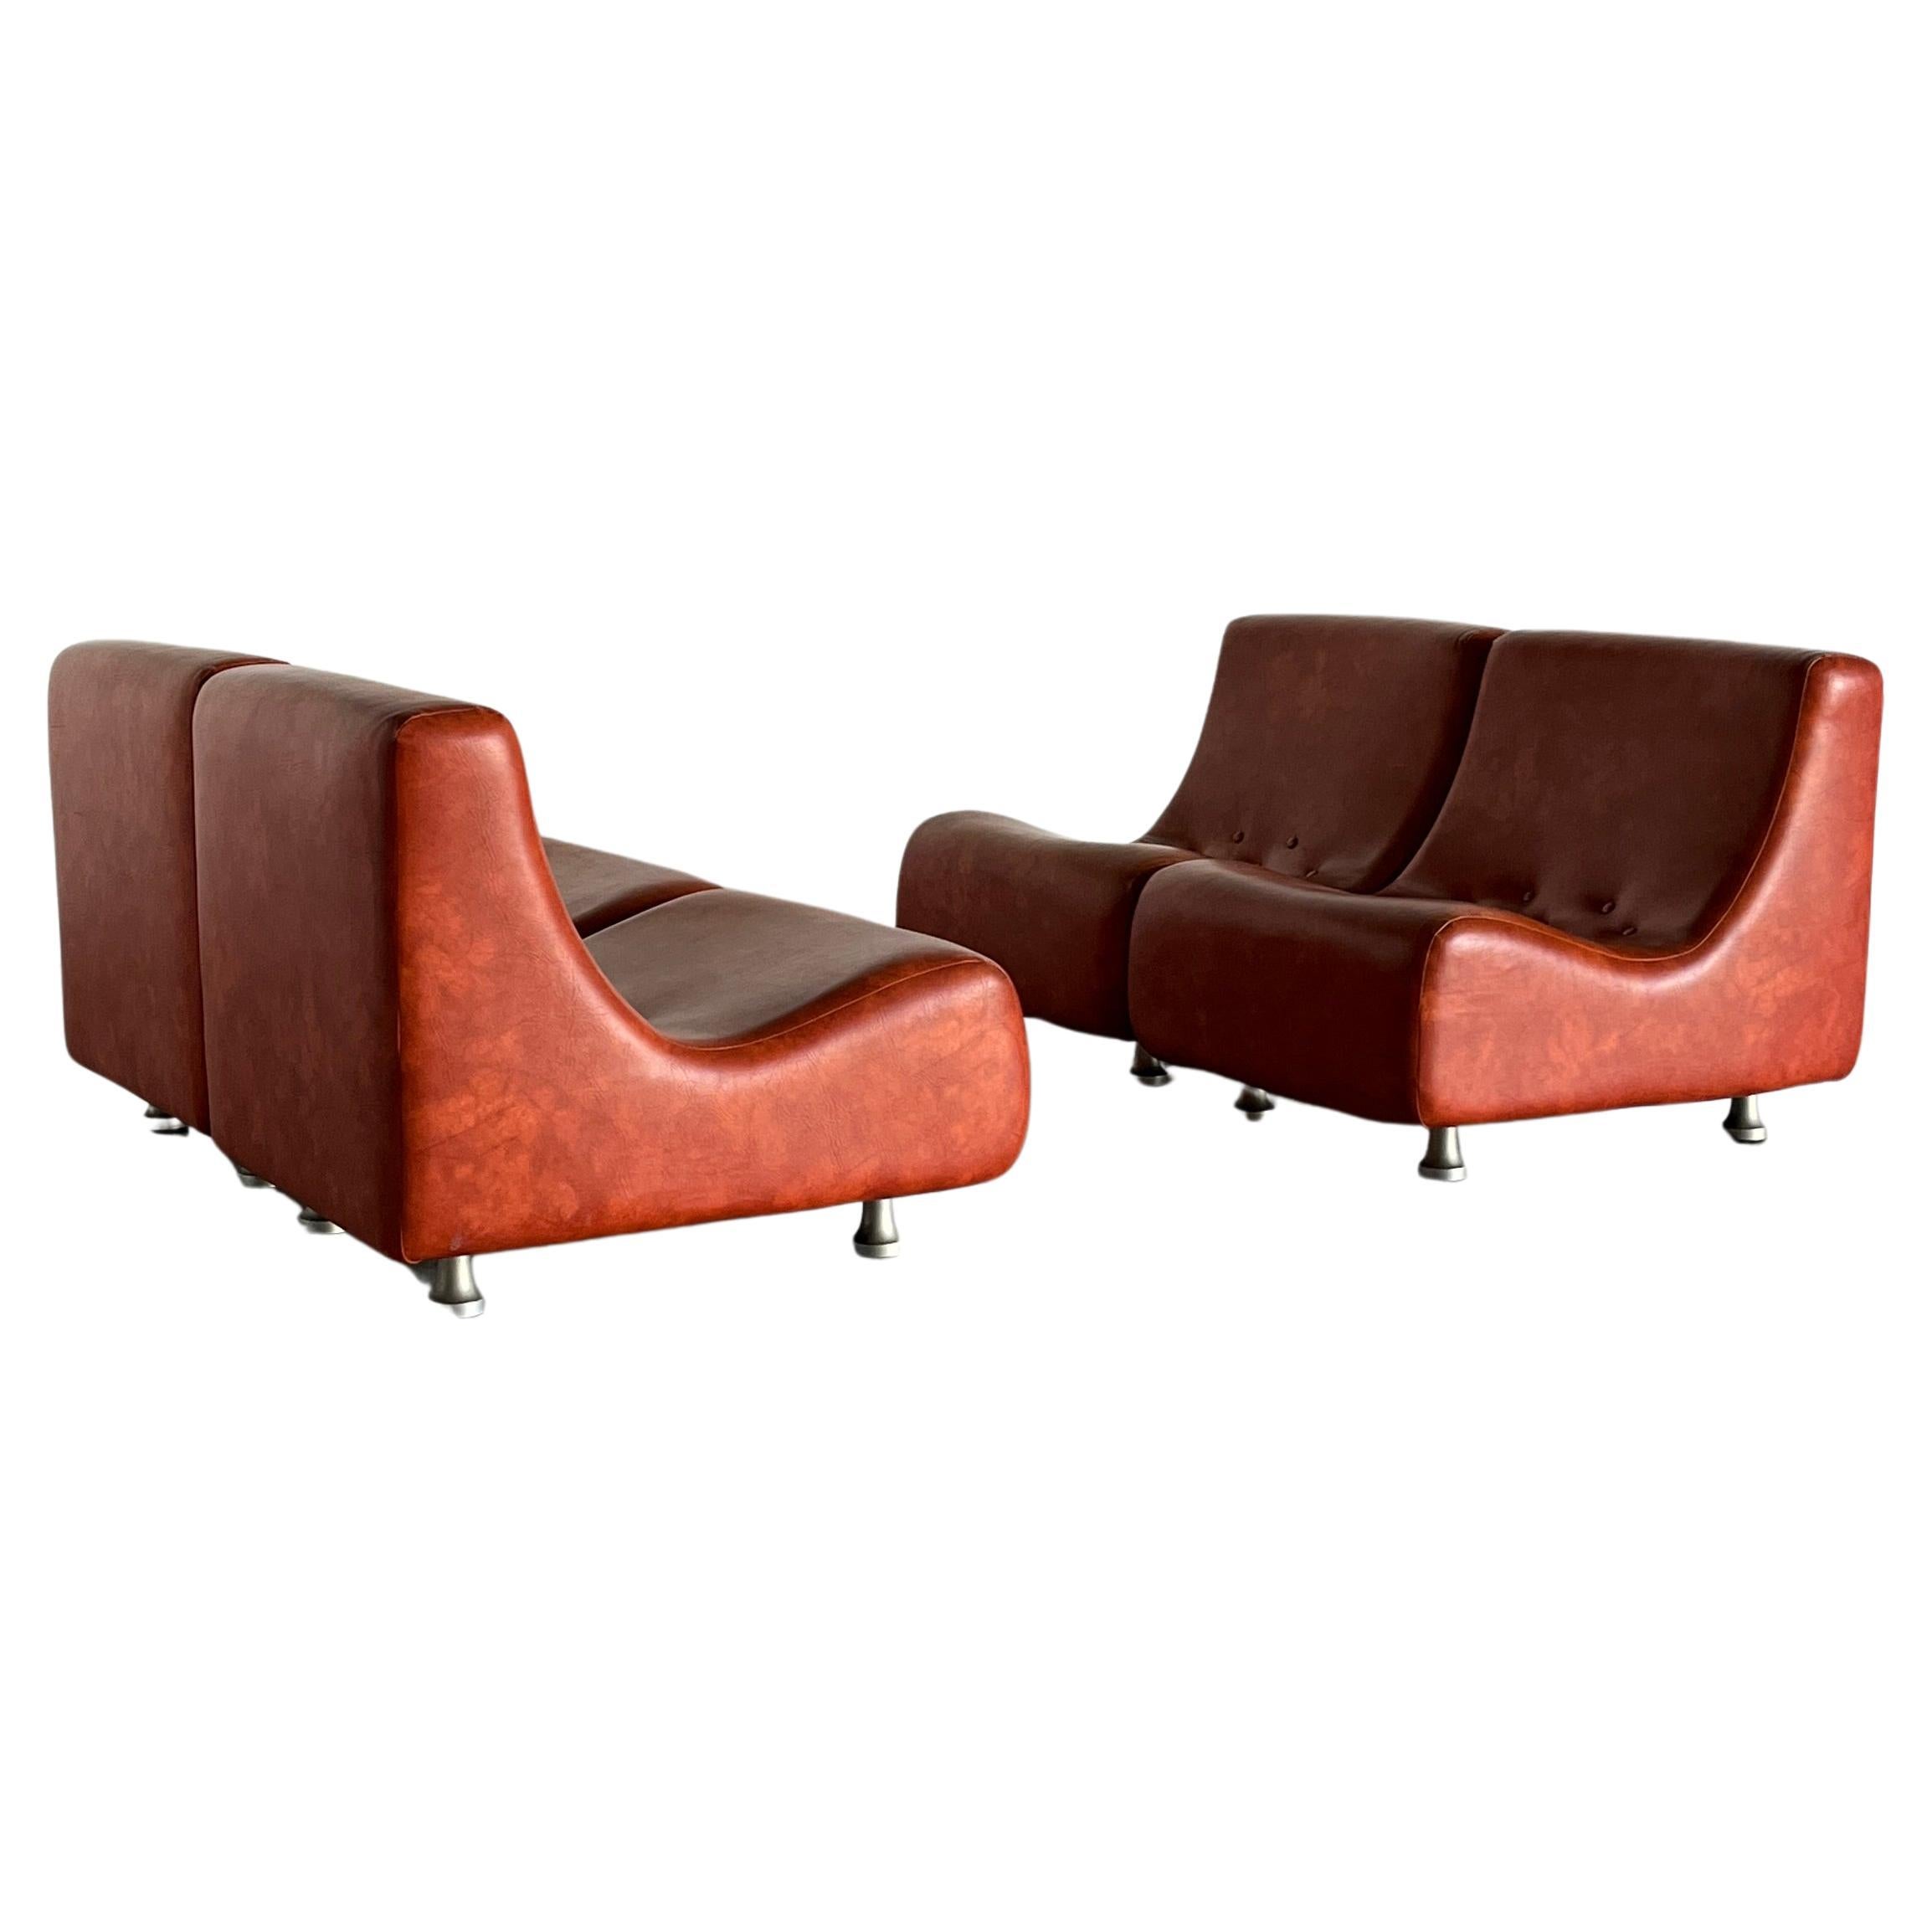 Italian Space-age four-part vintage lounge seating set or modular sofa. 
Beautiful and unique shape and a high-quality 1970s production in thick reddish brown faux leather upholstery.
In style of designs by Luigi Collani for COR.

Very well